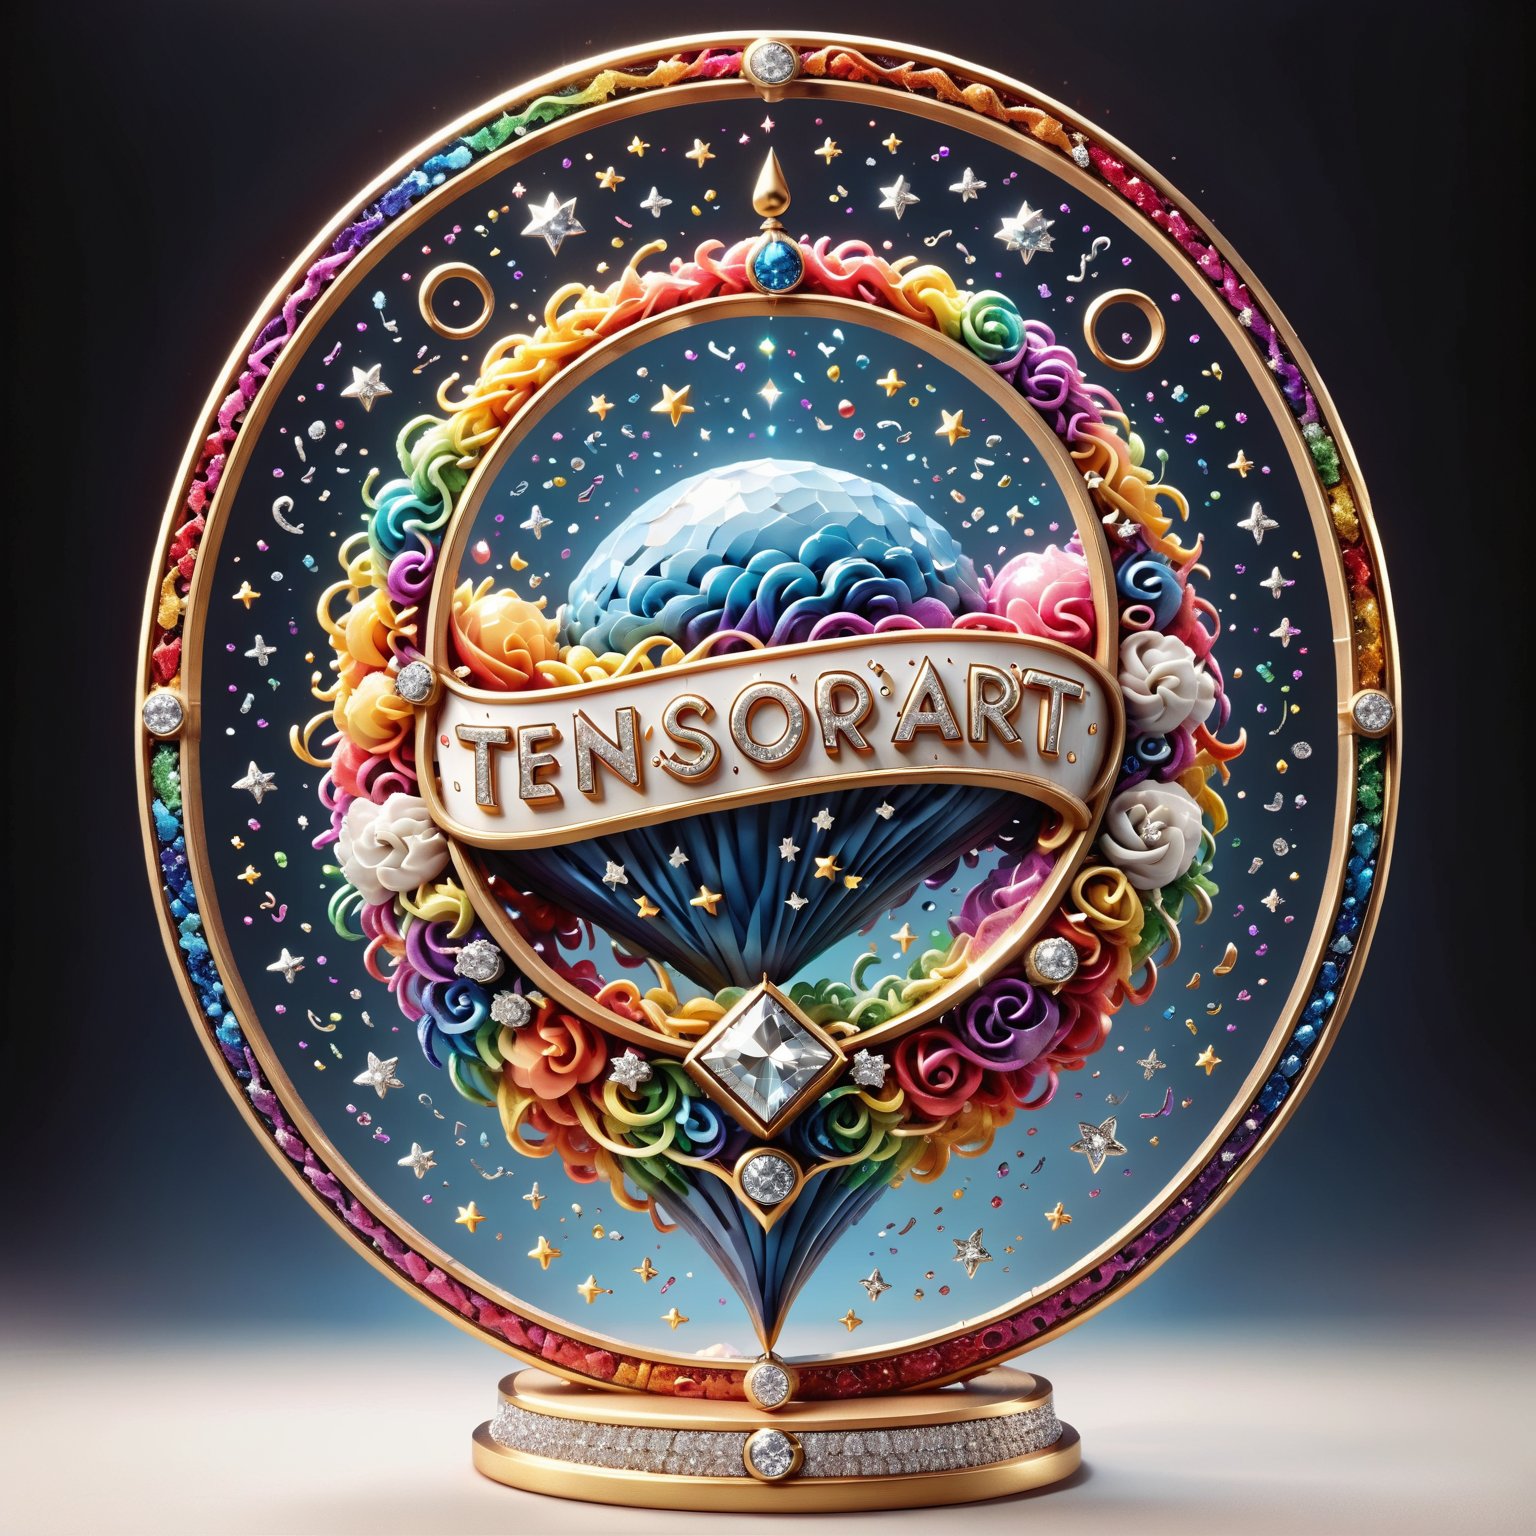 a ultra-detailed intricate round award, diamond and platinum outlines (((text in cursive with only the letters "TENSOR ART"))) rainbow, clouds, diamonds, gems, music notes,ice-cream,translucent